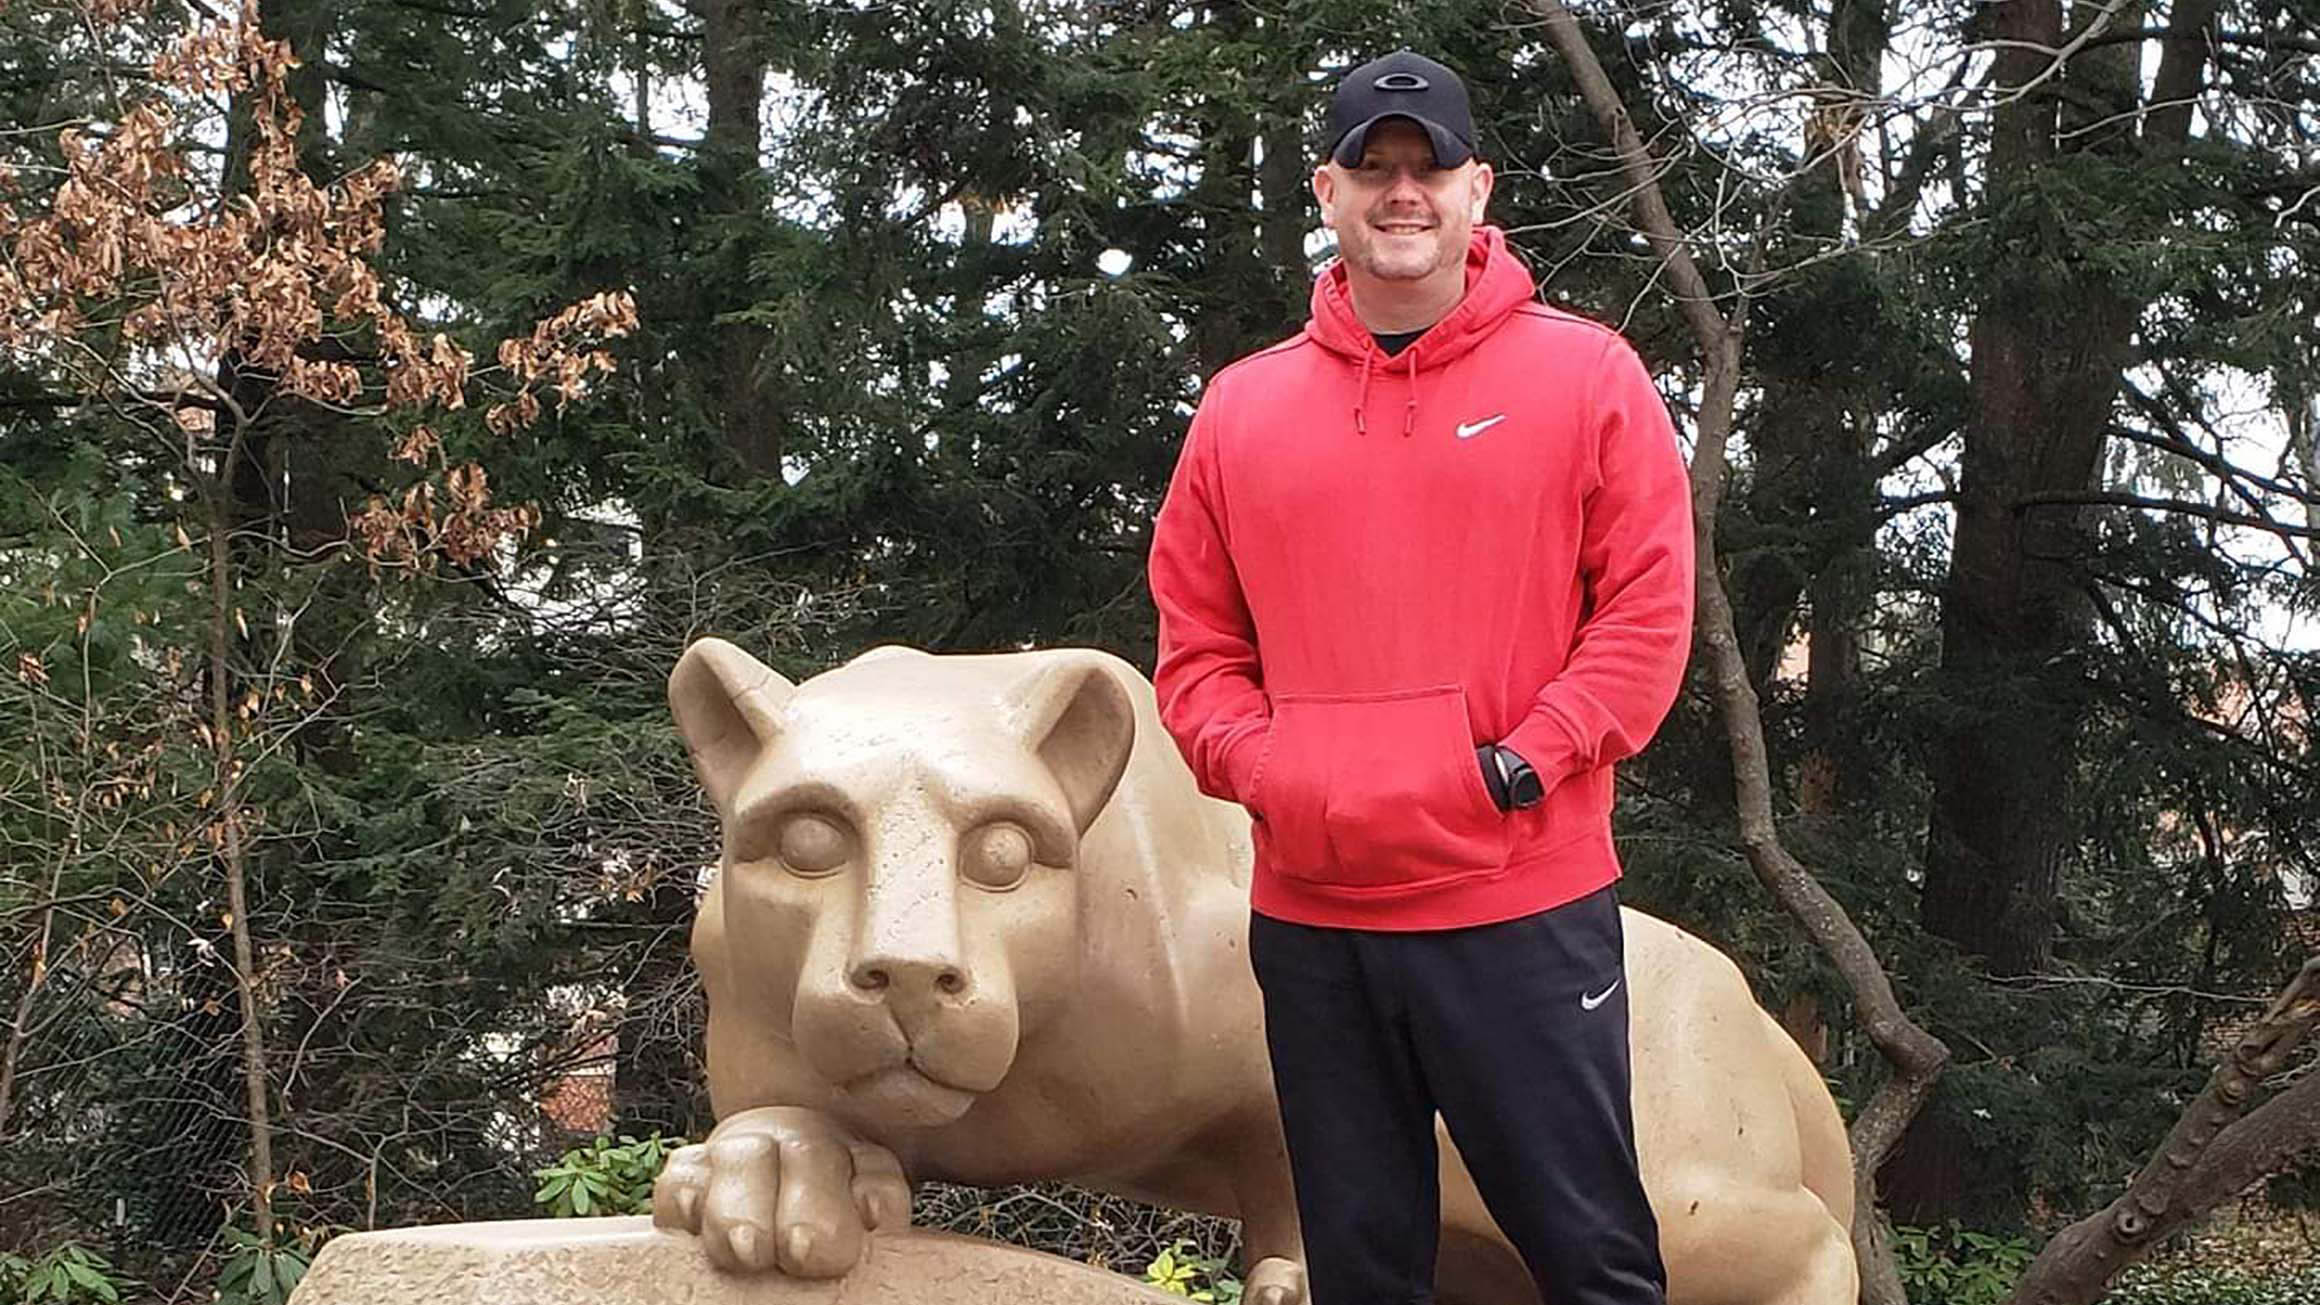 James Bacon at the Nittany Lion shrine